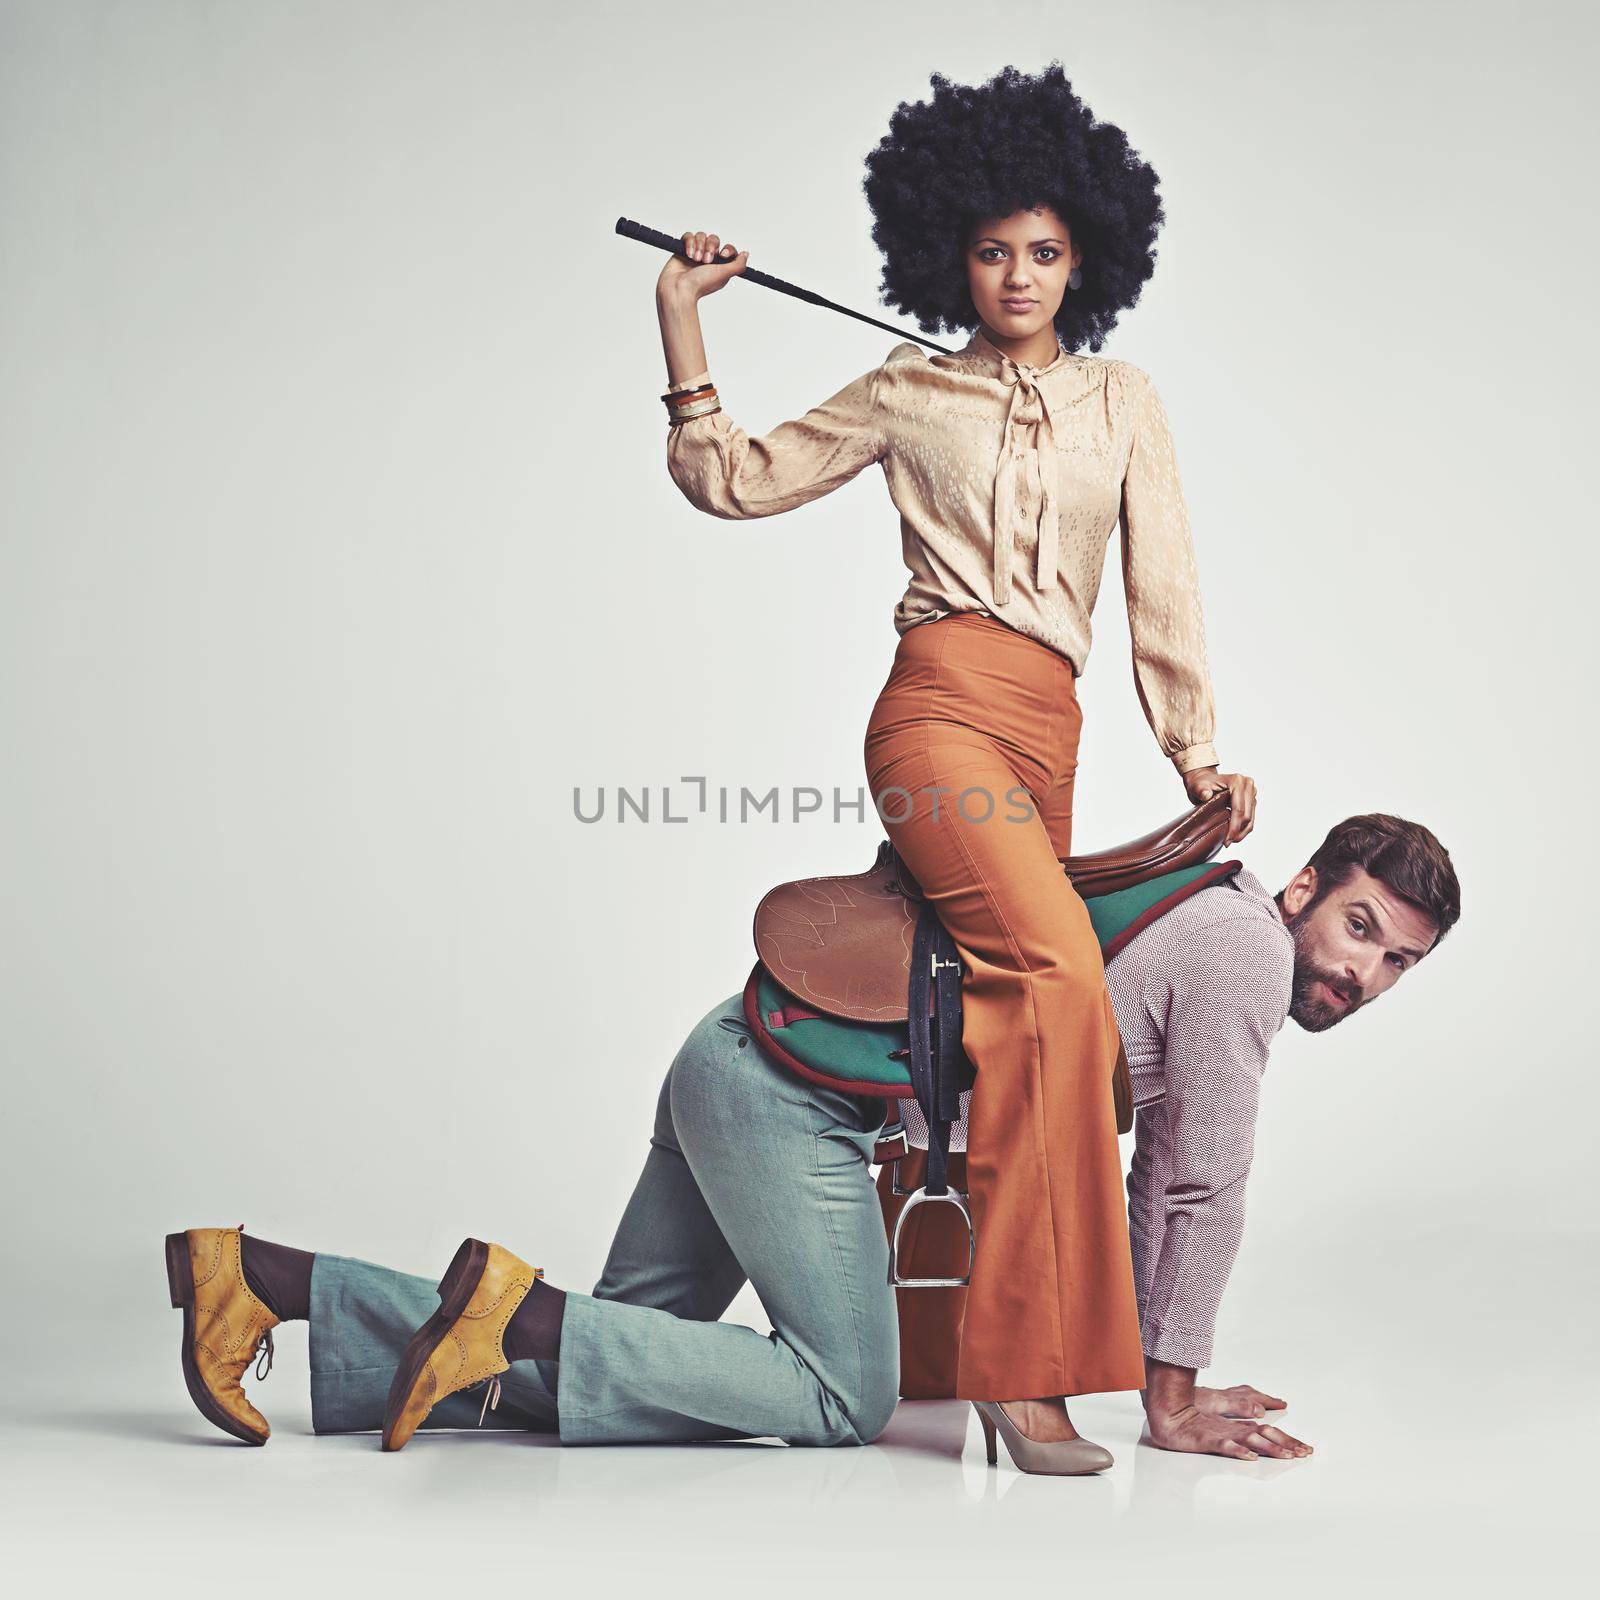 A studio shot of an attractive woman in 70s wear riding a handsome man wearing a saddle while using a riding crop